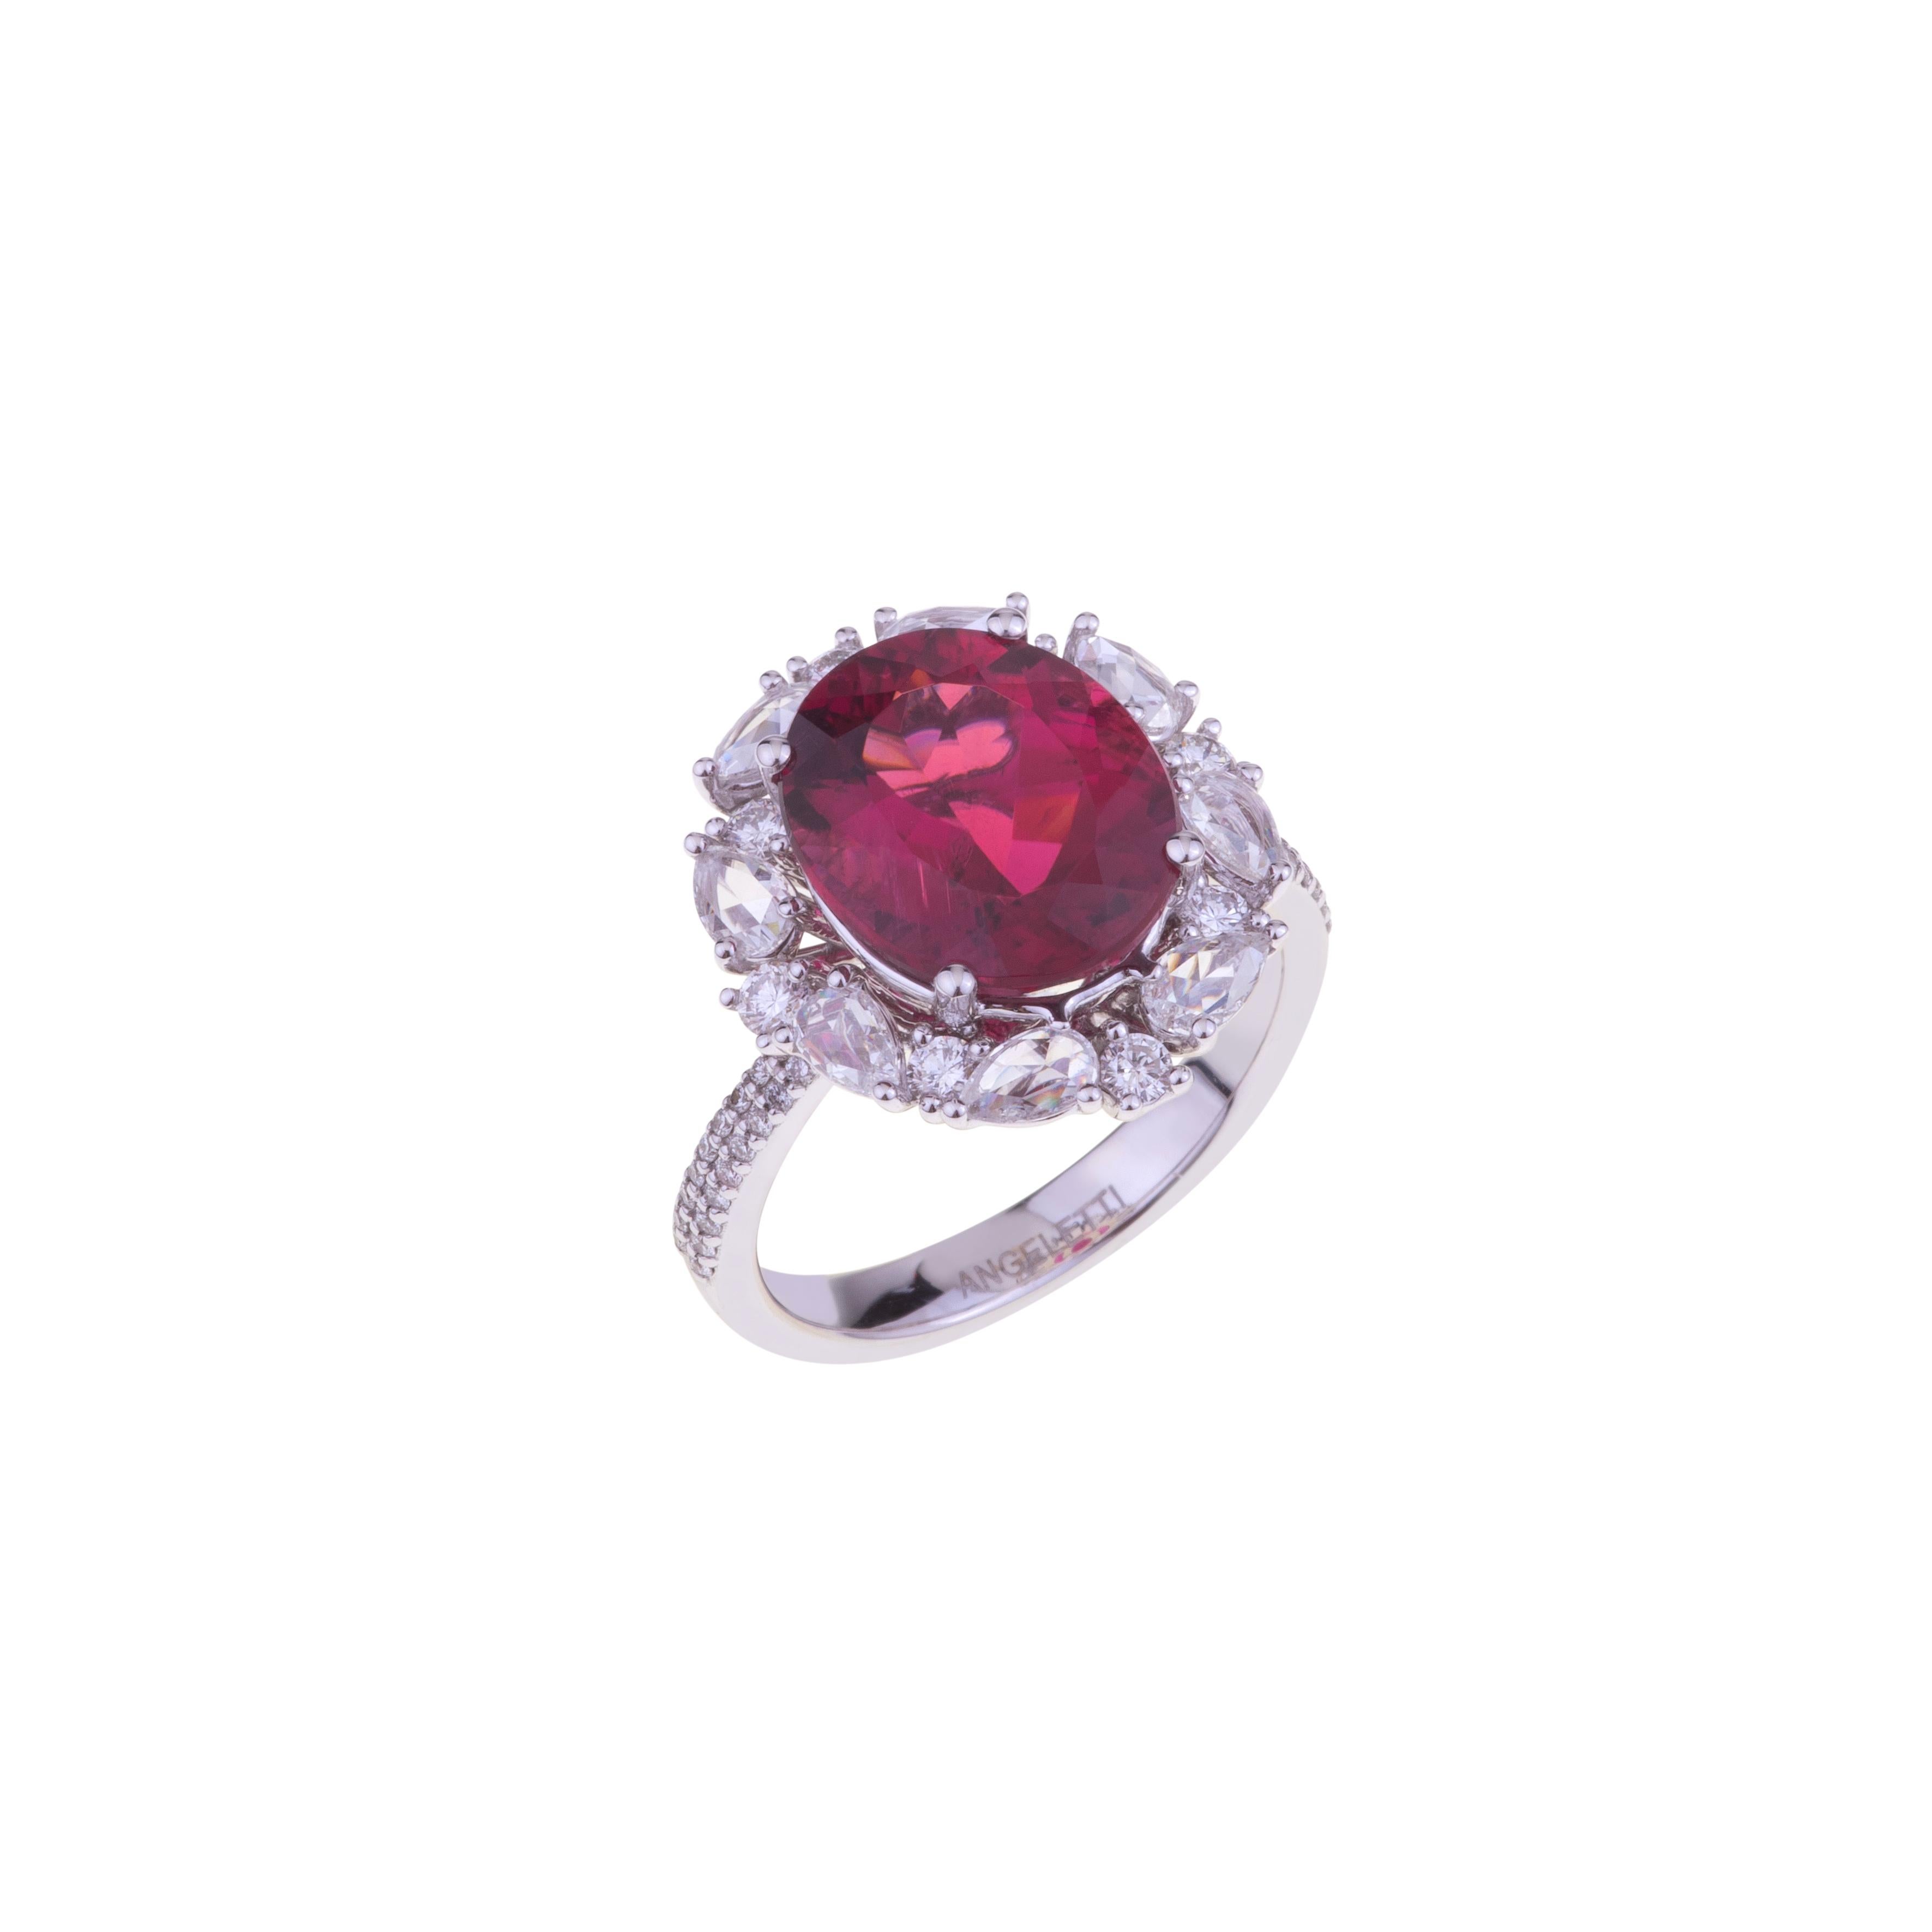 Oval Certified Rubellite Ring White Gold with Diamonds.
The Ring is Dominated by an Exceptional Rose Red Rubellite ct. 4.99 (with Certificate) and is set with White Gold and Pear Shape Rose cut Diamonds ct. 2.48 VVS. The weight of the 18kt gold is